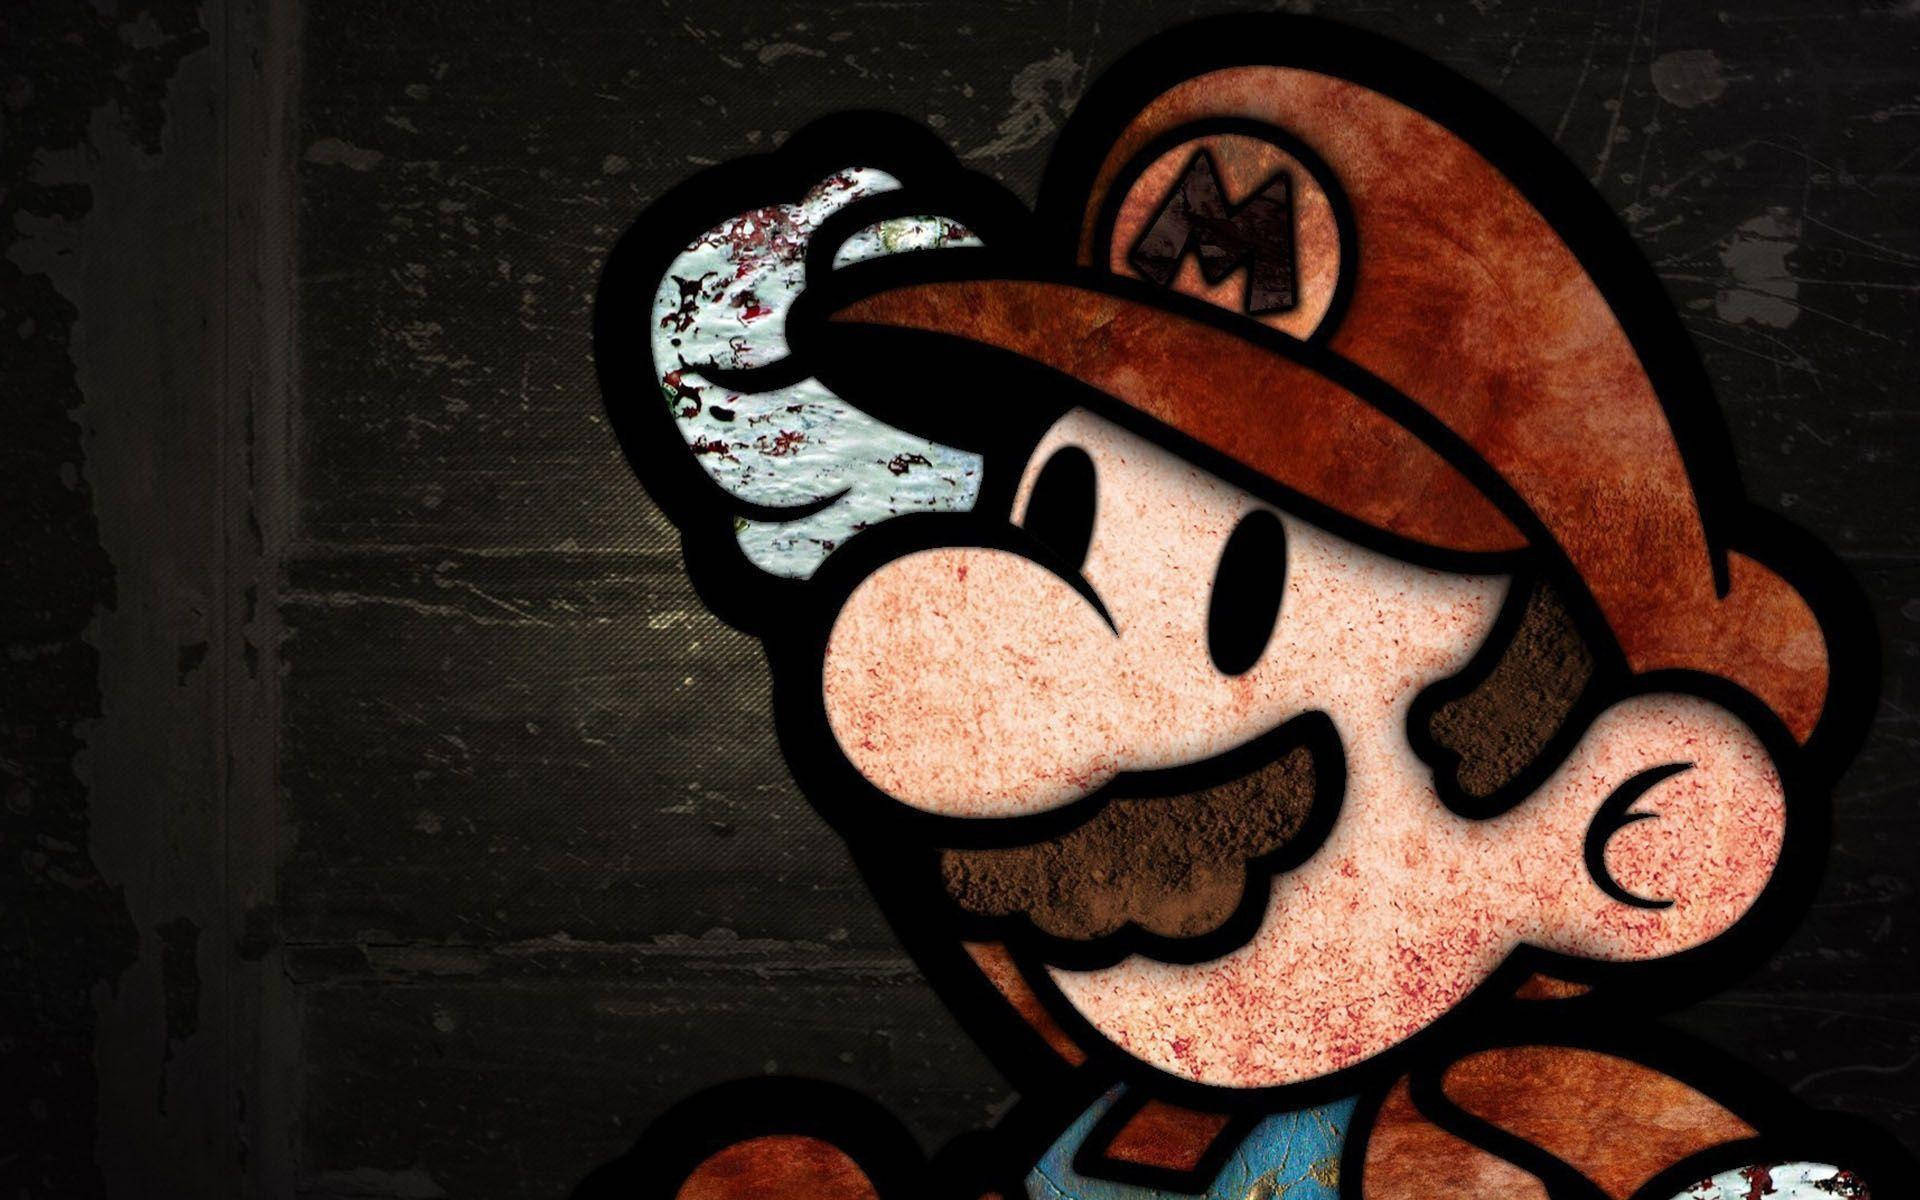 Mario 1920X1200 Wallpaper and Background Image